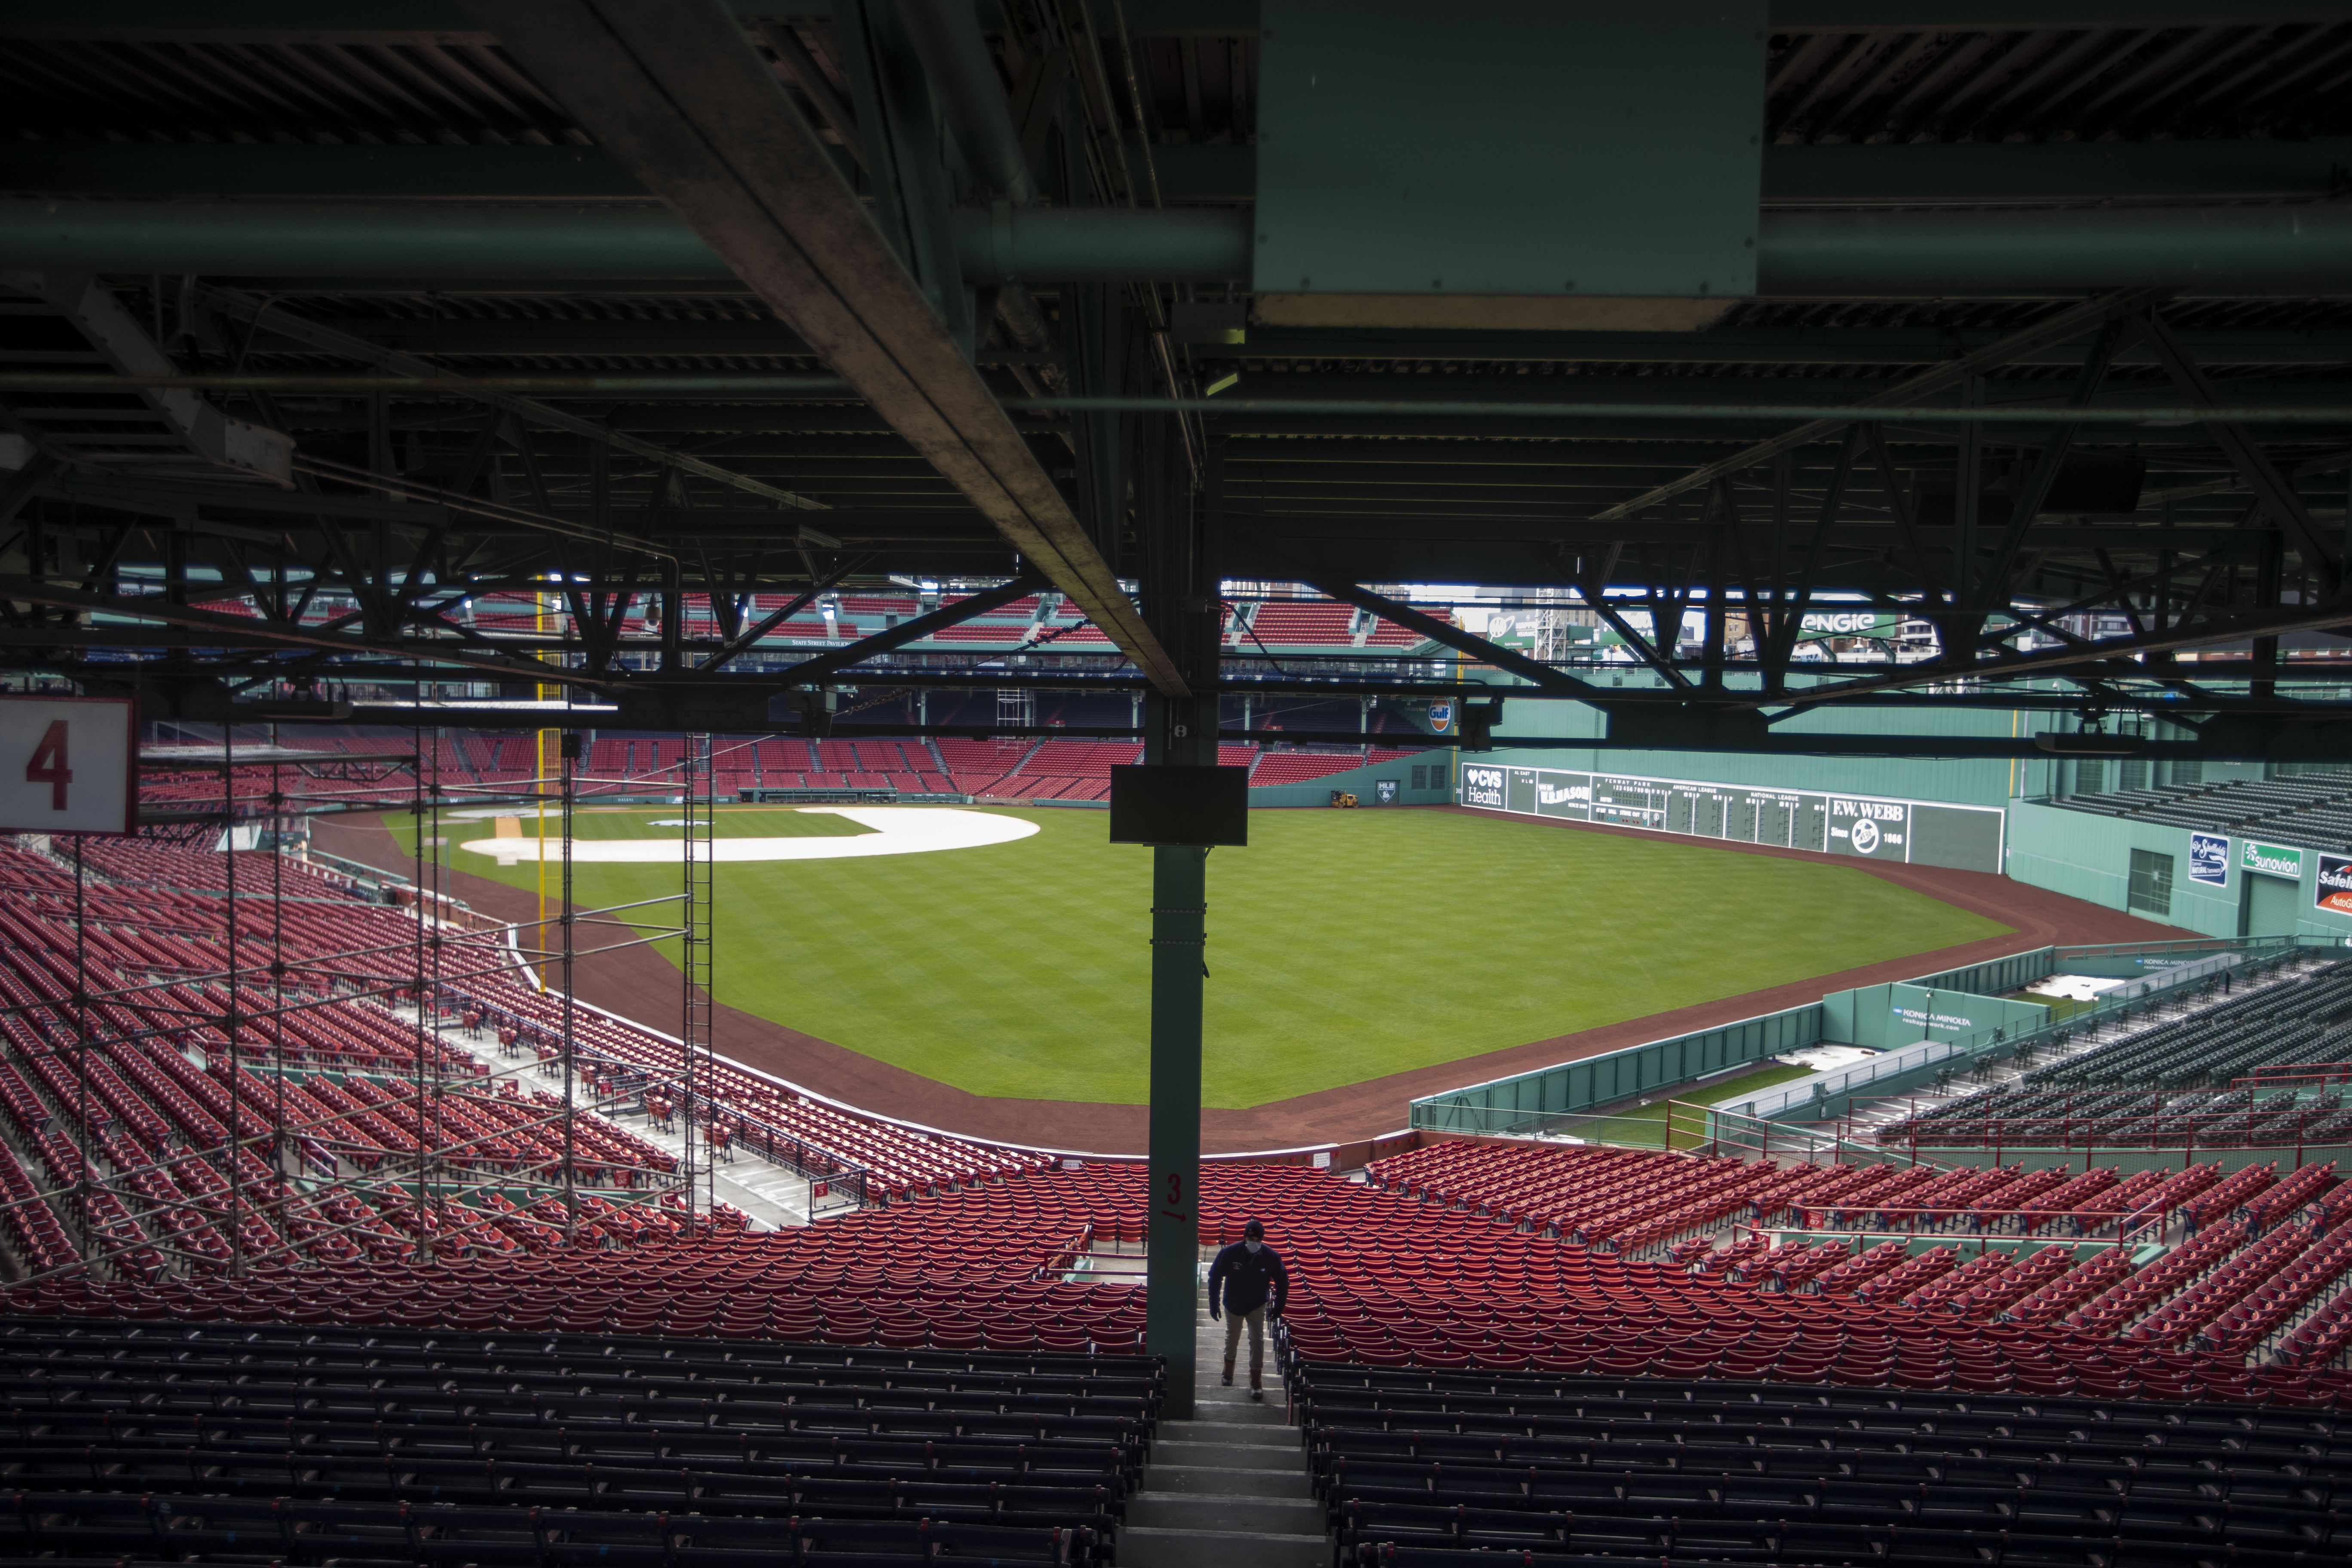 Here's a close-up look at Fenway Park - Northeastern Global News